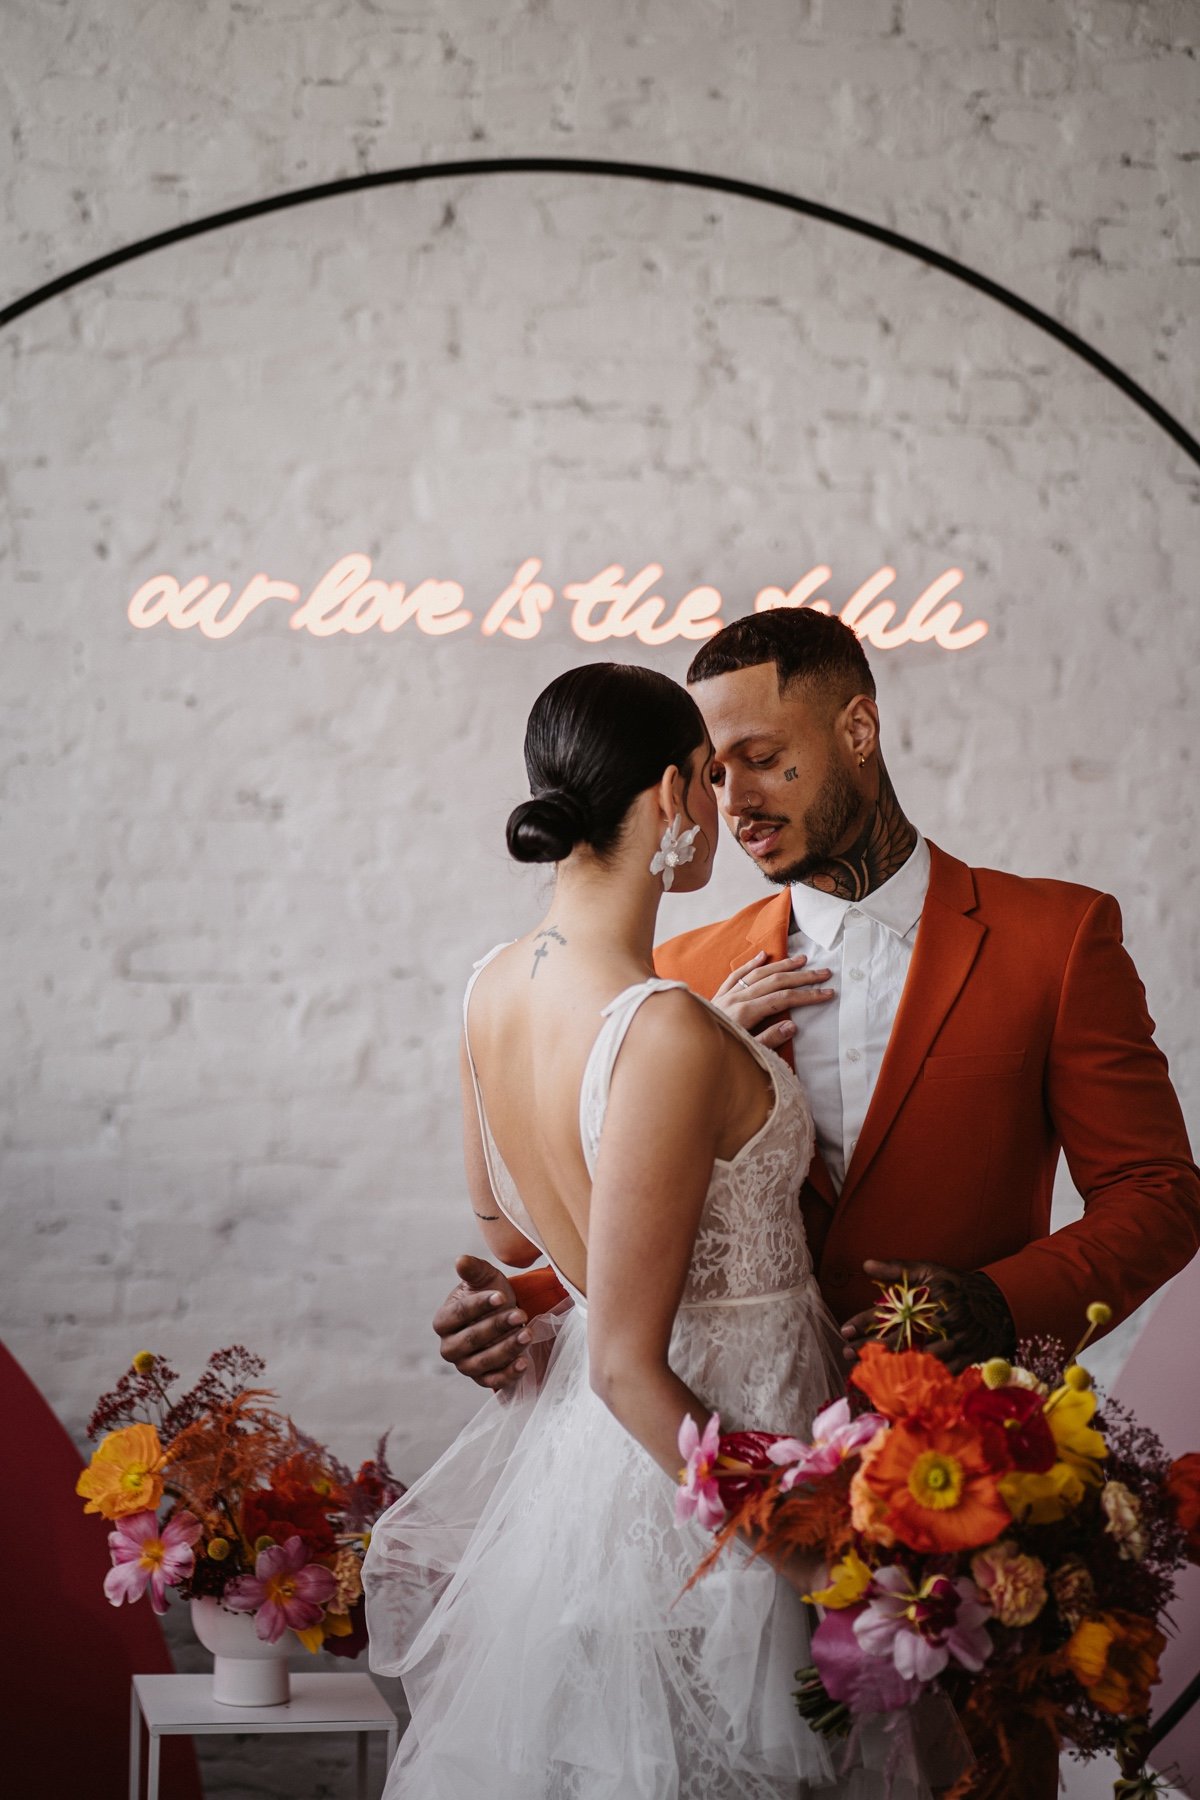 Bold Colors for a Bold Couple at this Bright and Colorful Inspo Shoot